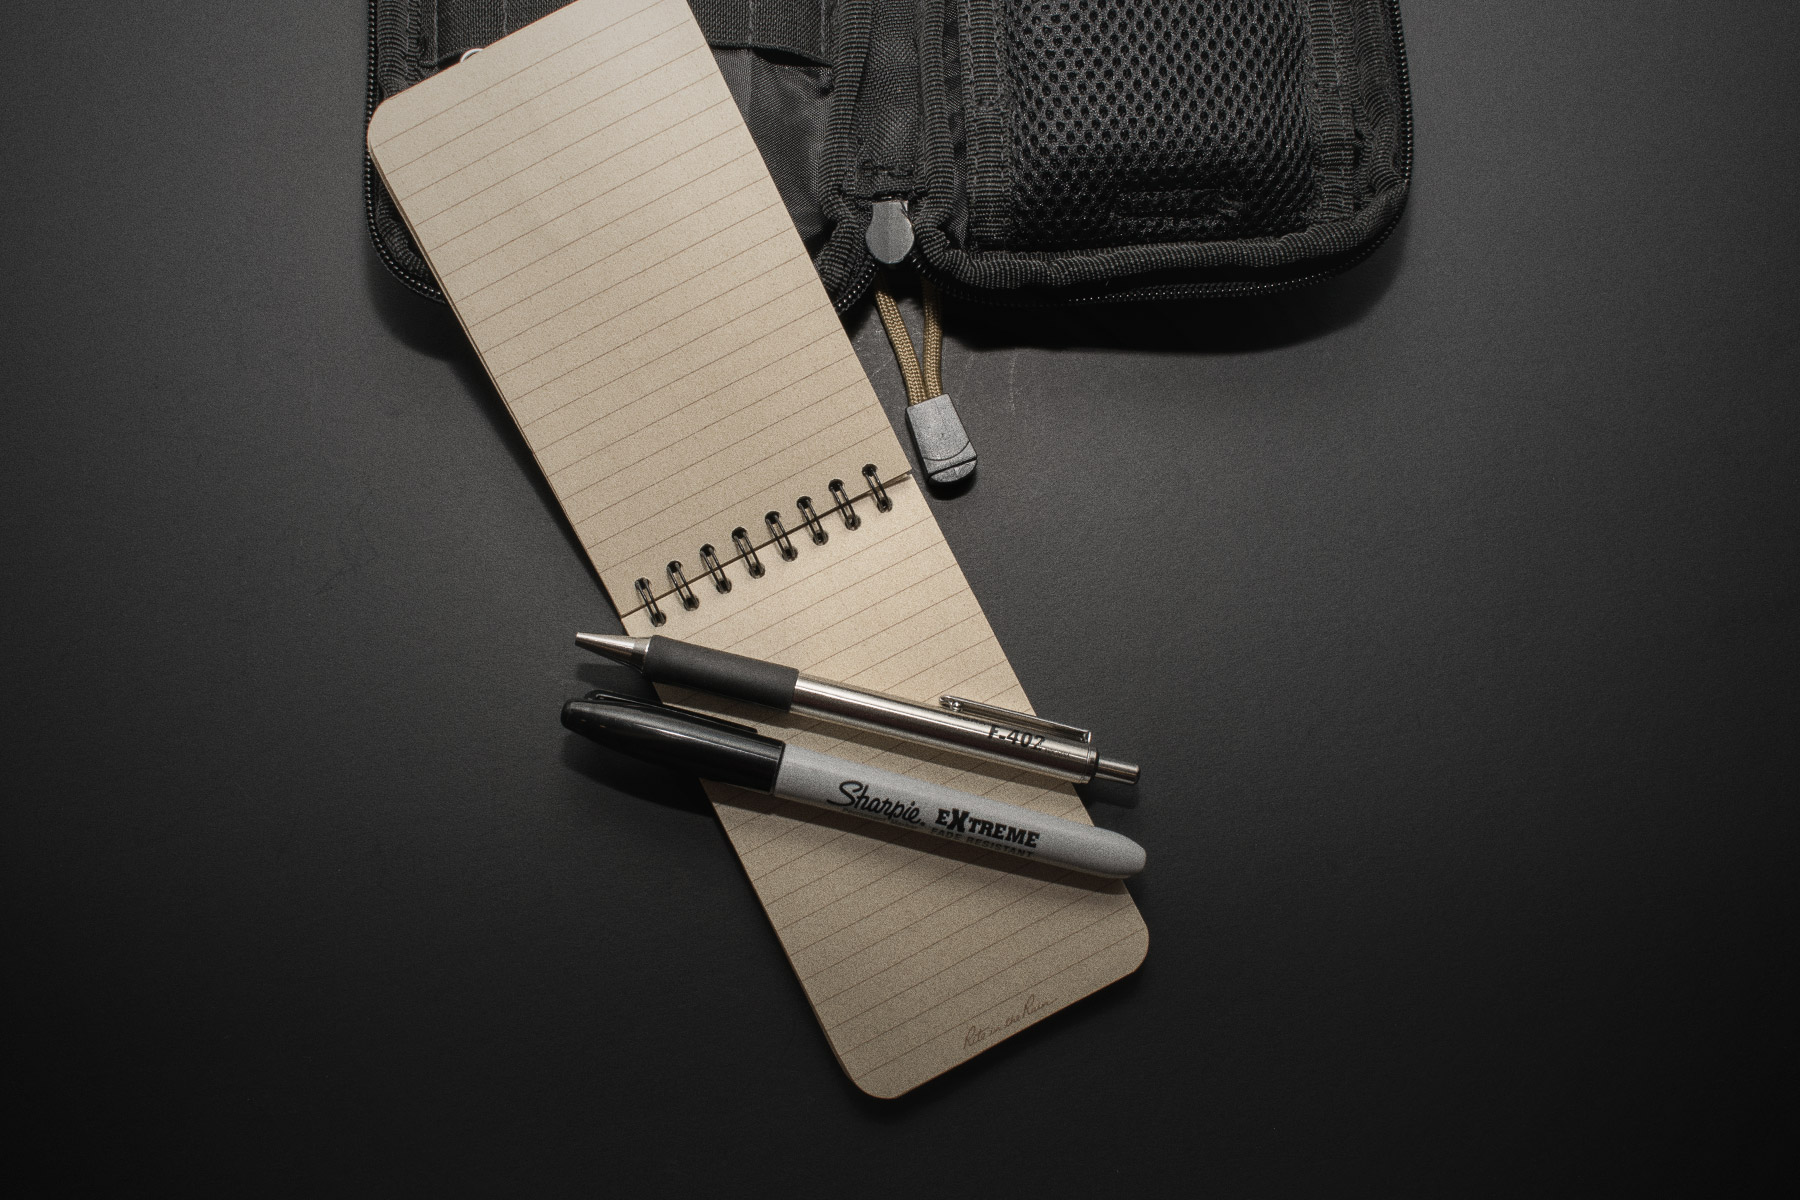 Everyday Carry Notebook and pen